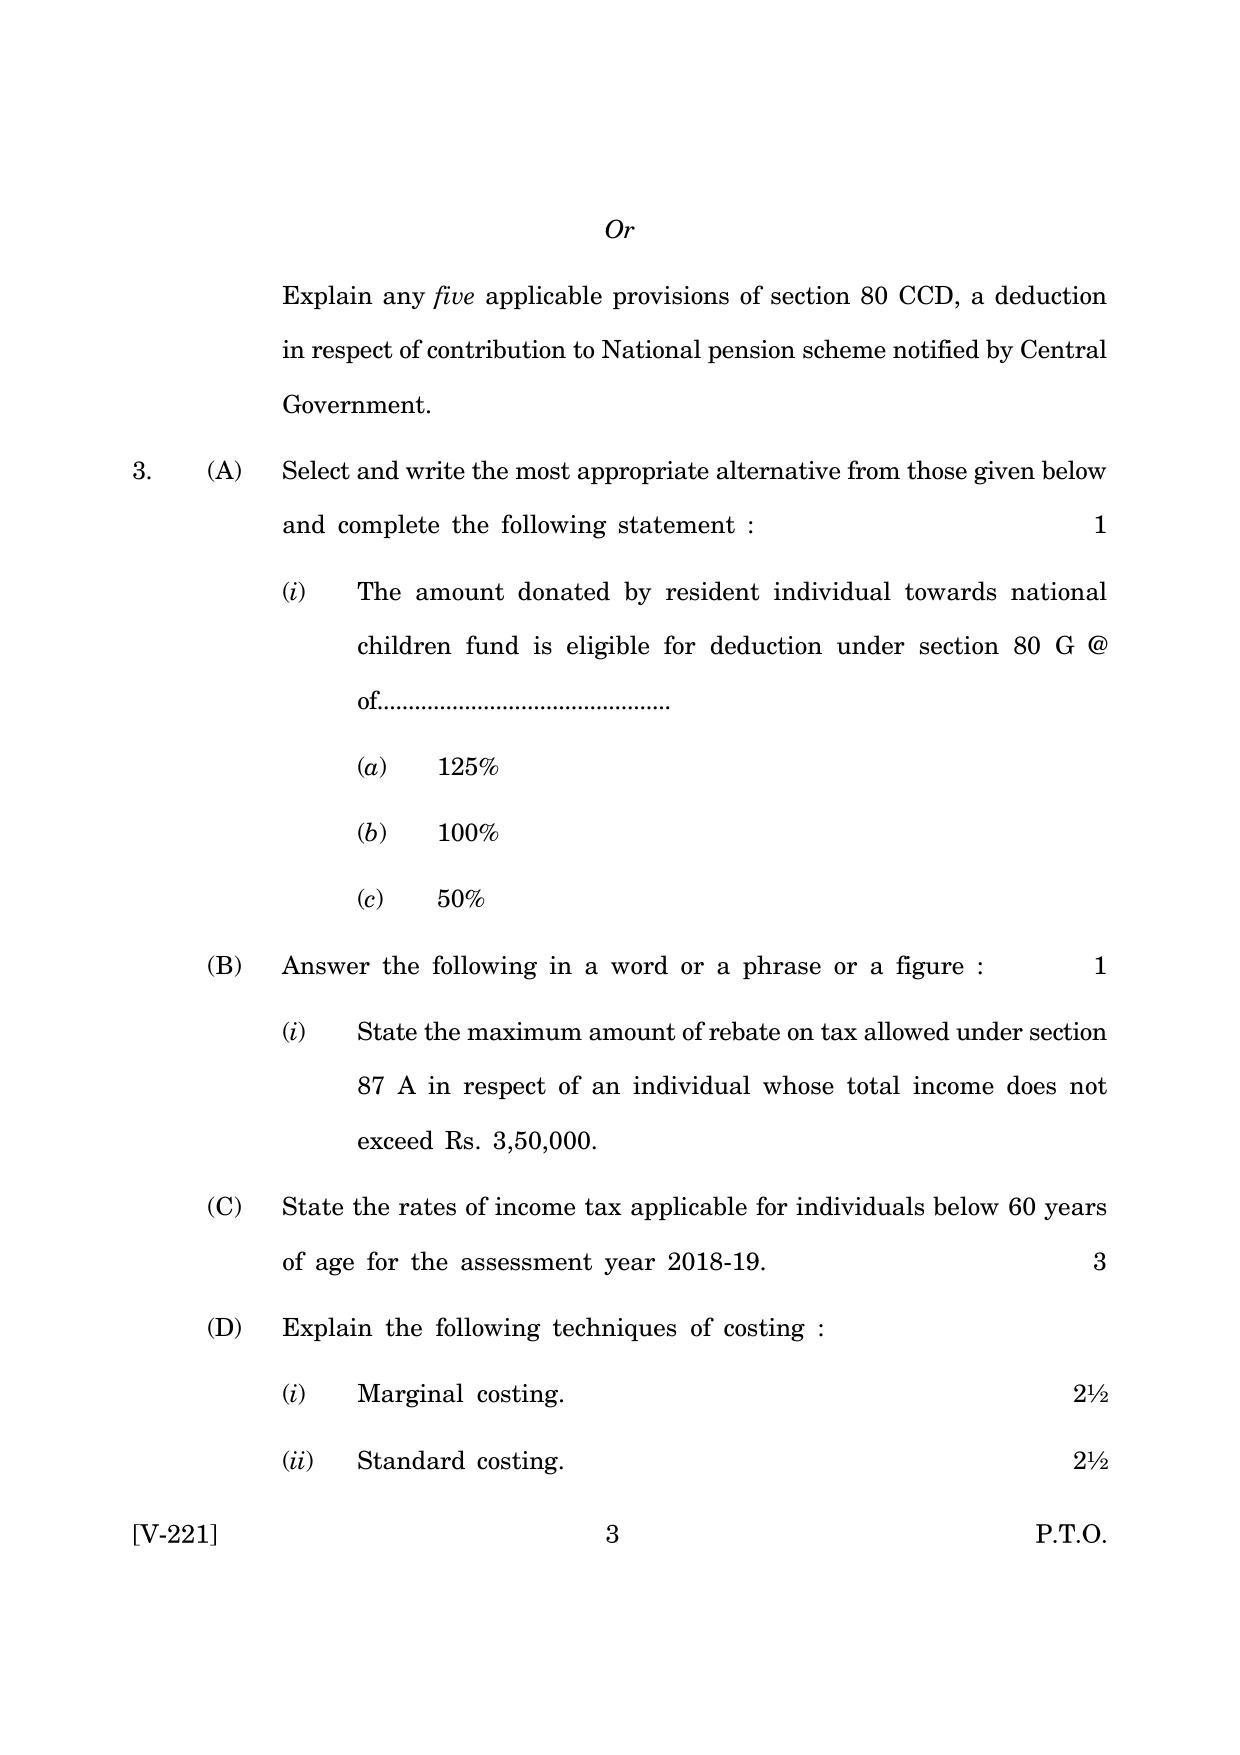 Goa Board Class 12 Cost Accounting & Taxation  2019 (March 2019) Question Paper - Page 3